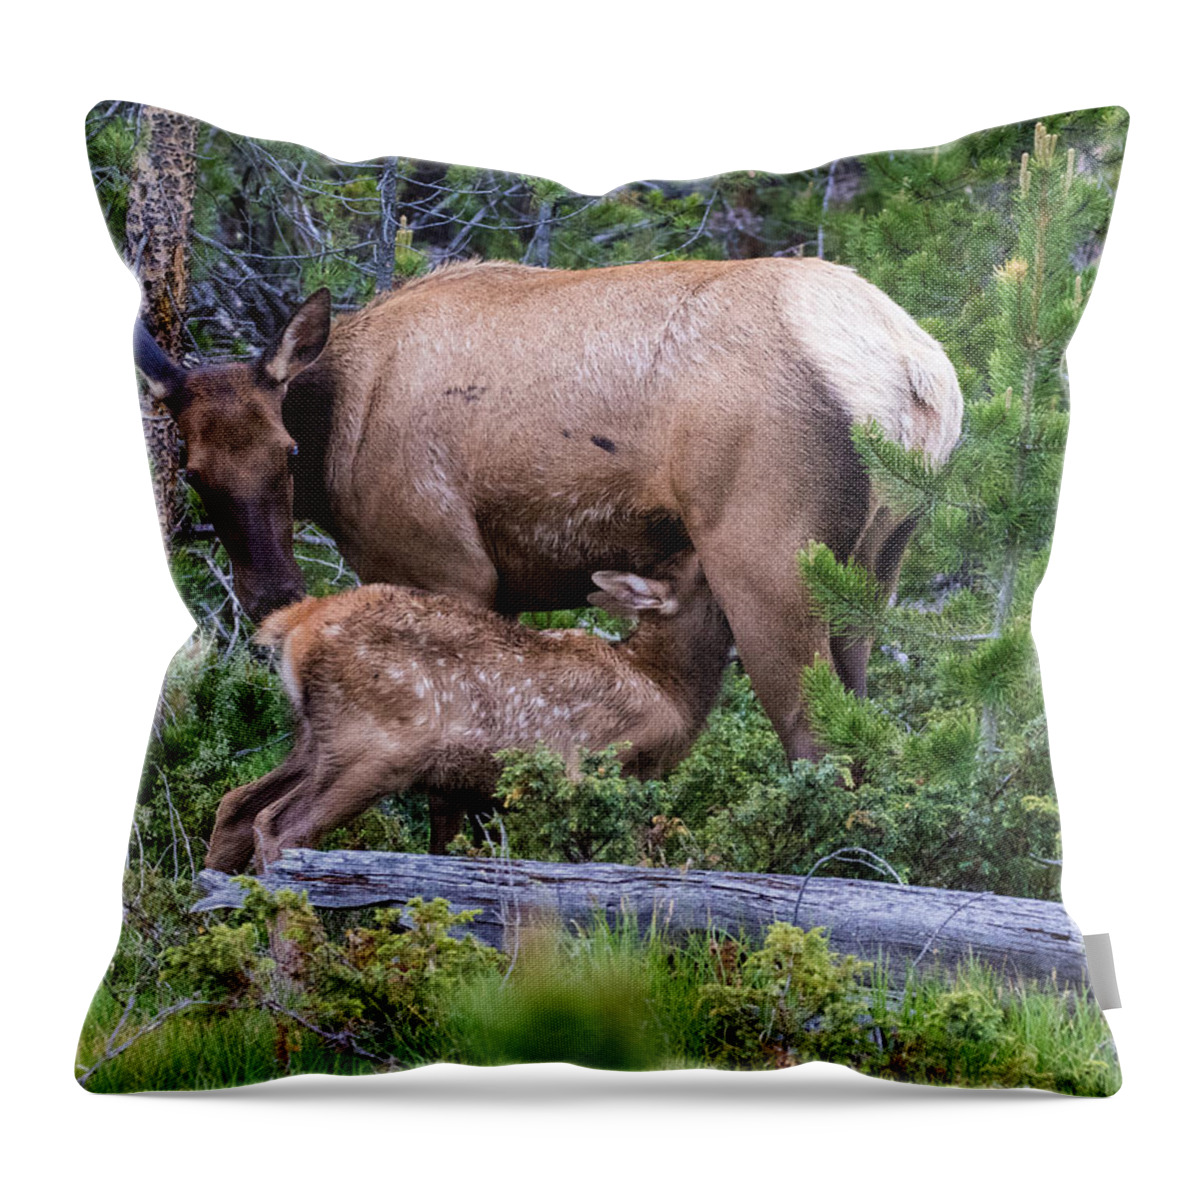 Elk Calf Throw Pillow featuring the photograph A Sweet Moment In Time by Mindy Musick King